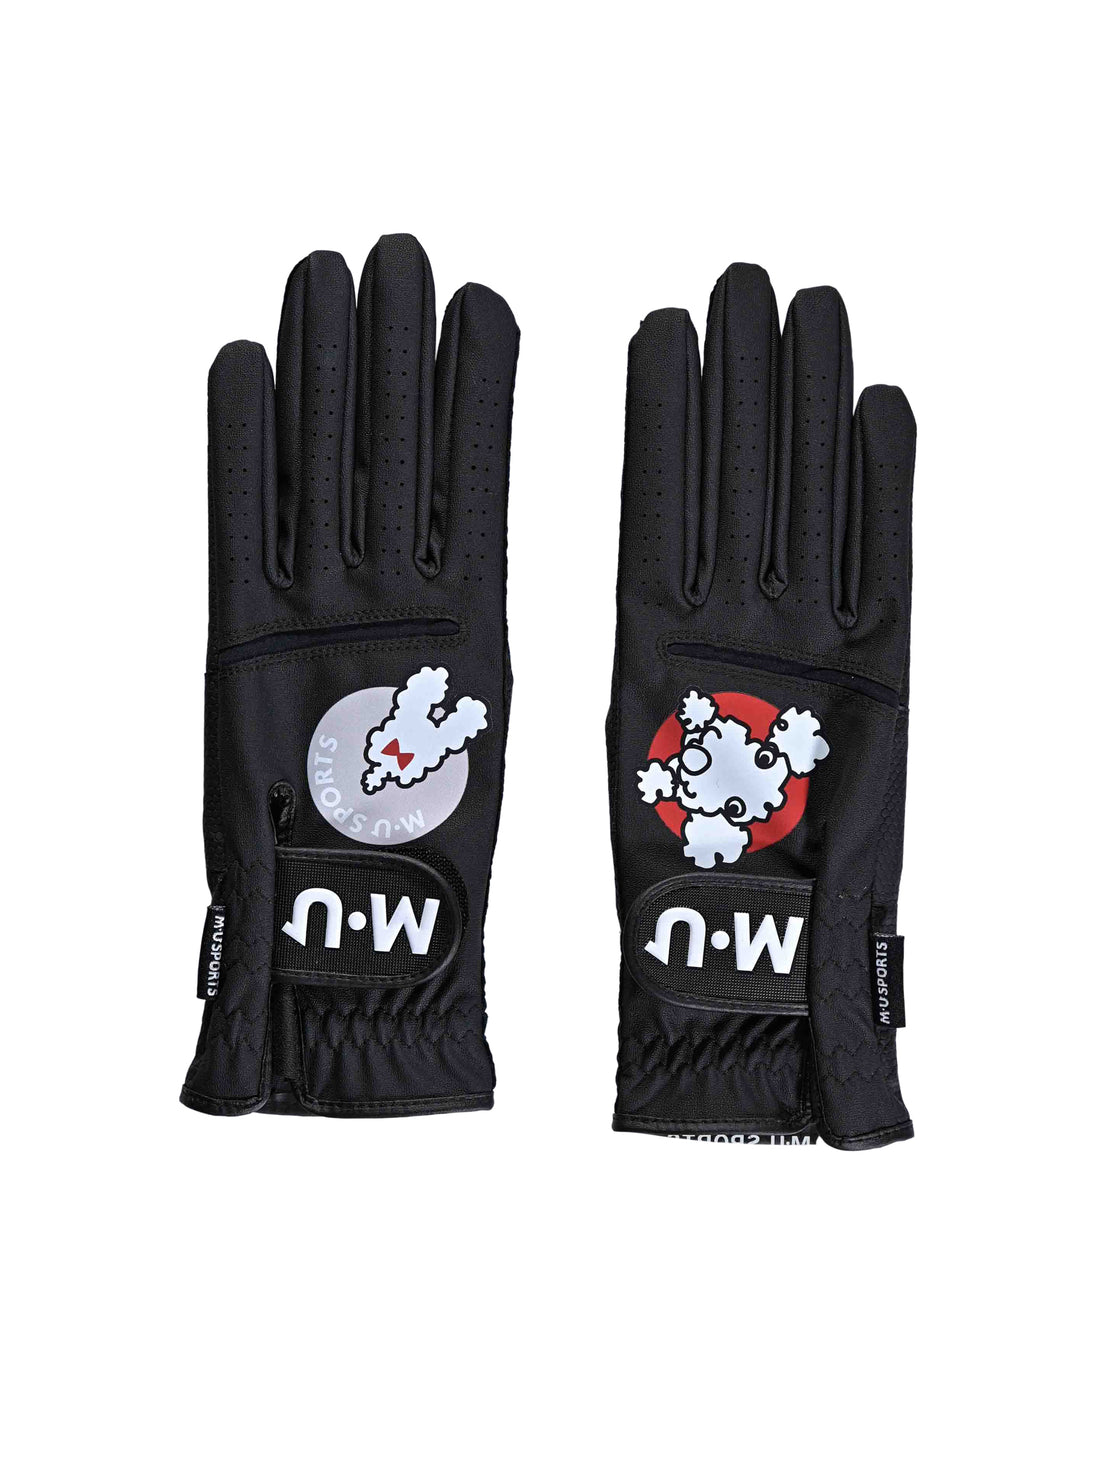 Tunnel motif two-handed gloves (703J6800)